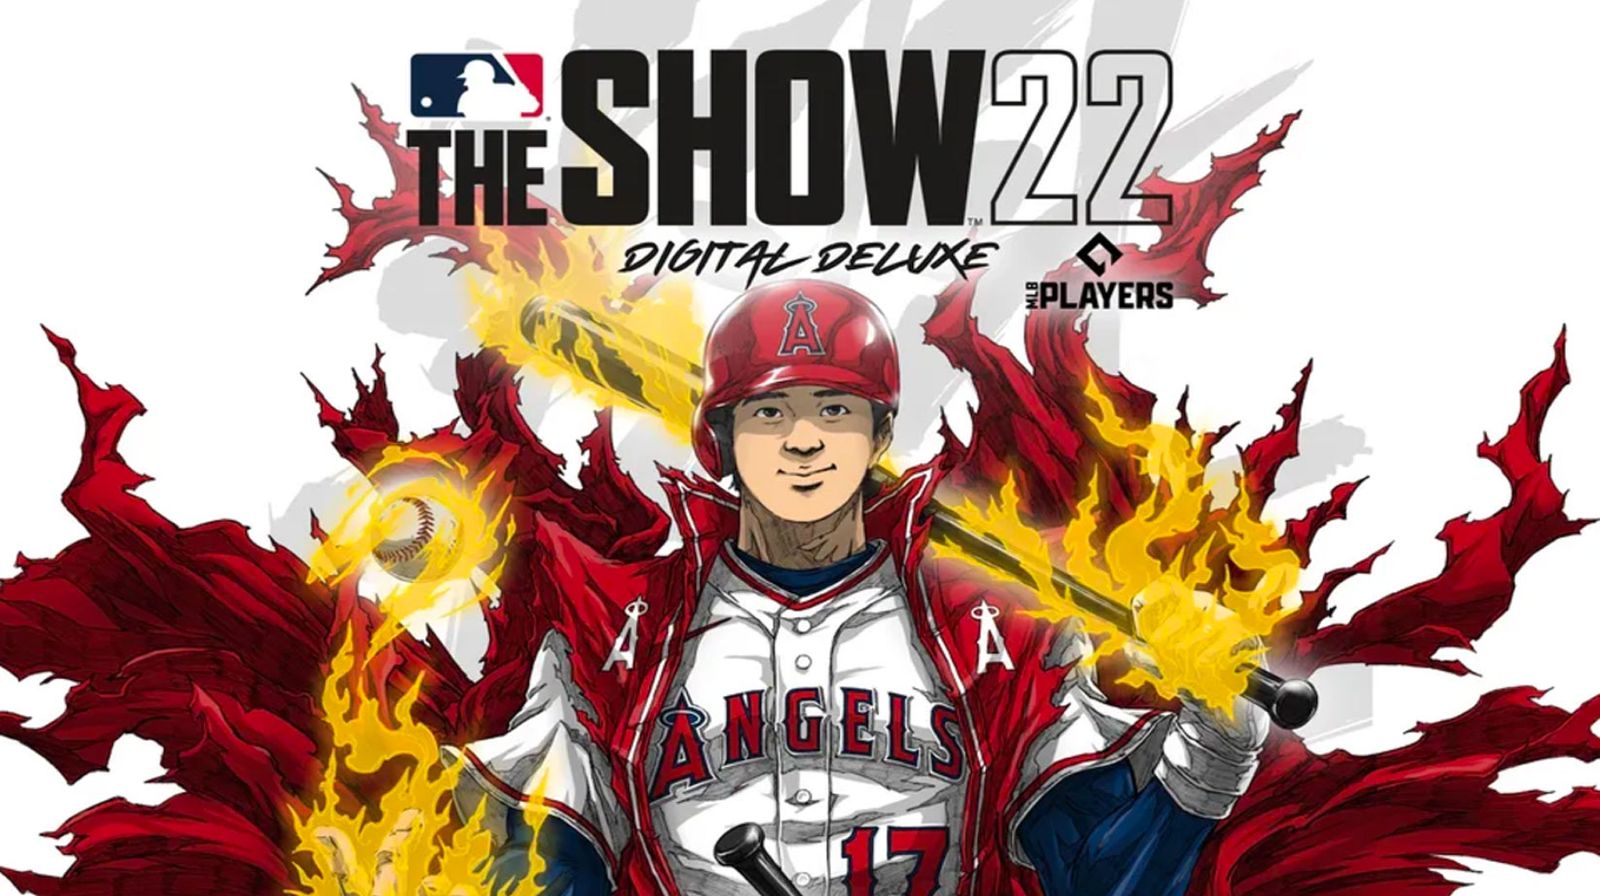 MLB The Show 22 Pre Order Digital Deluxe Edition.